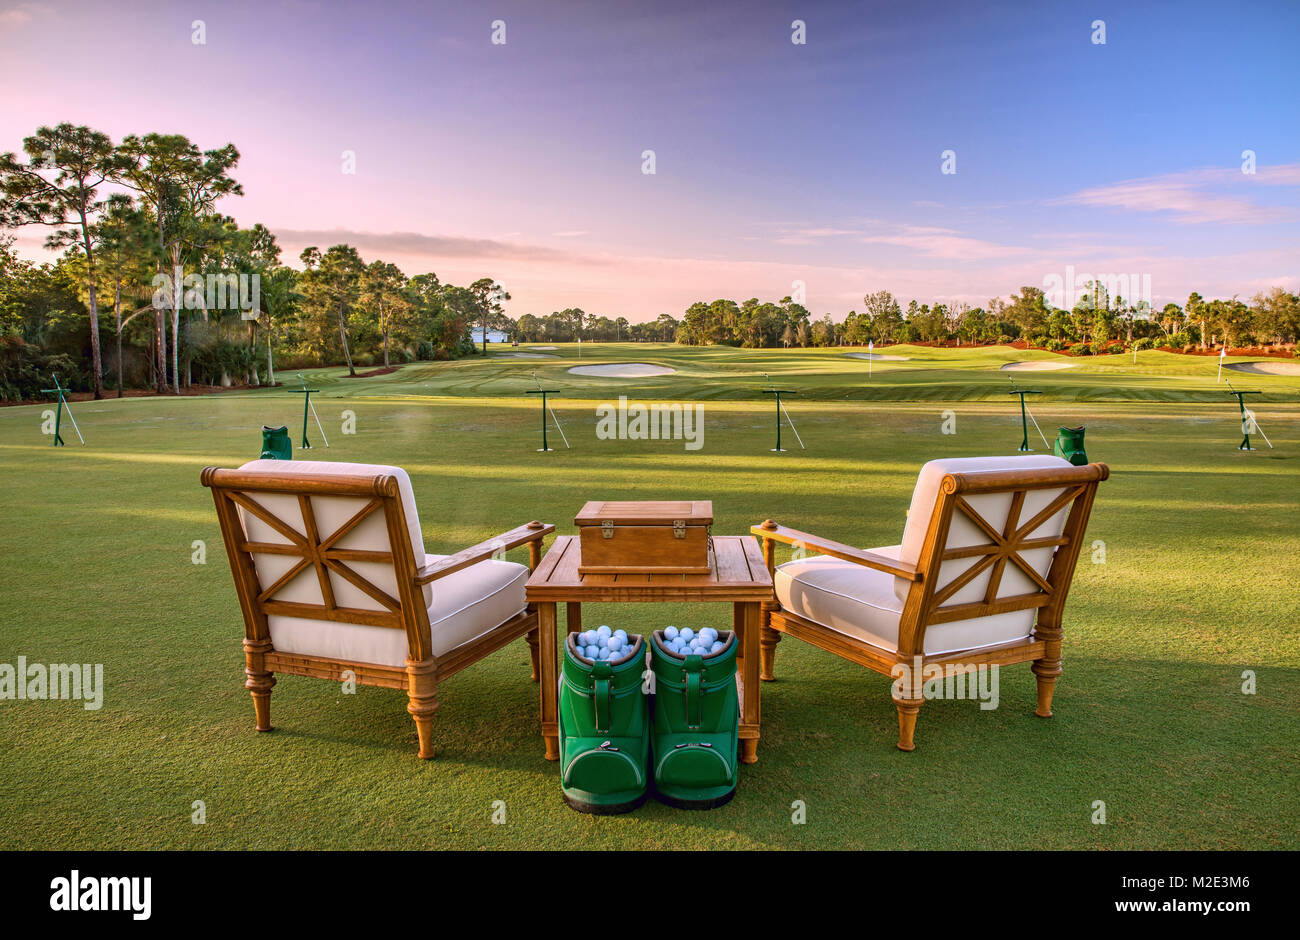 Chairs and golf balls on driving range Stock Photo